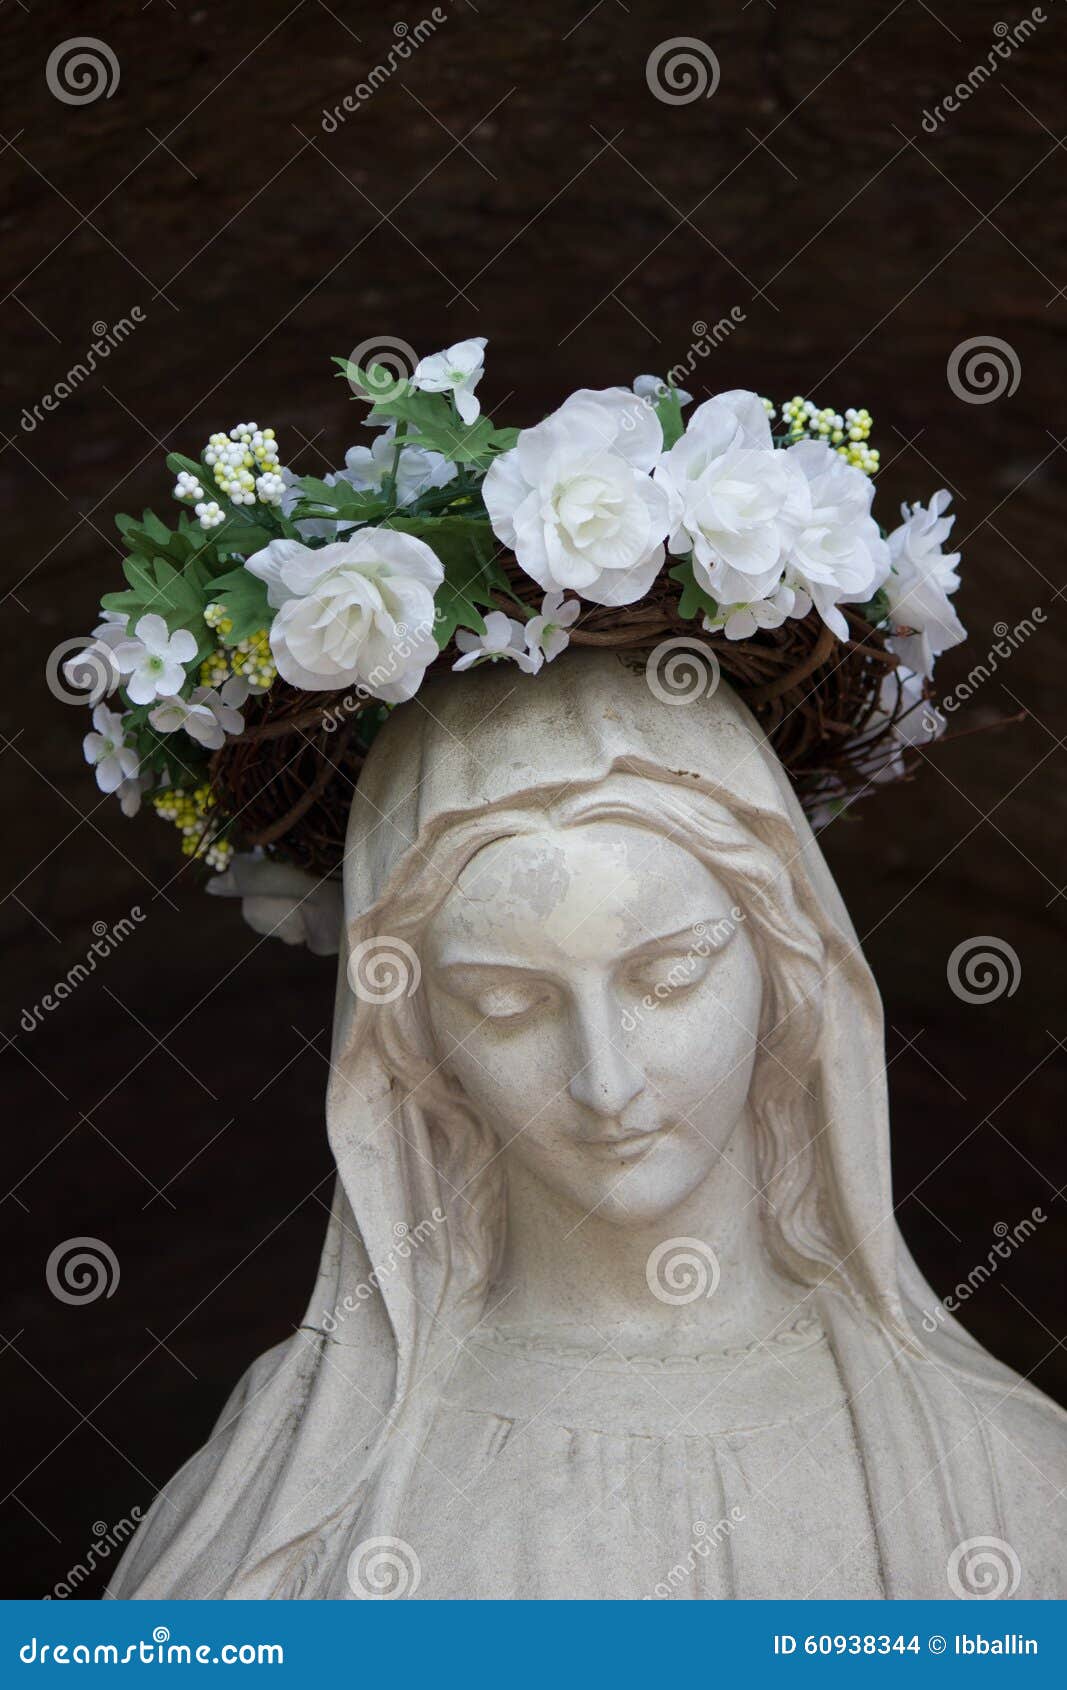 Mother Mary With Flowers